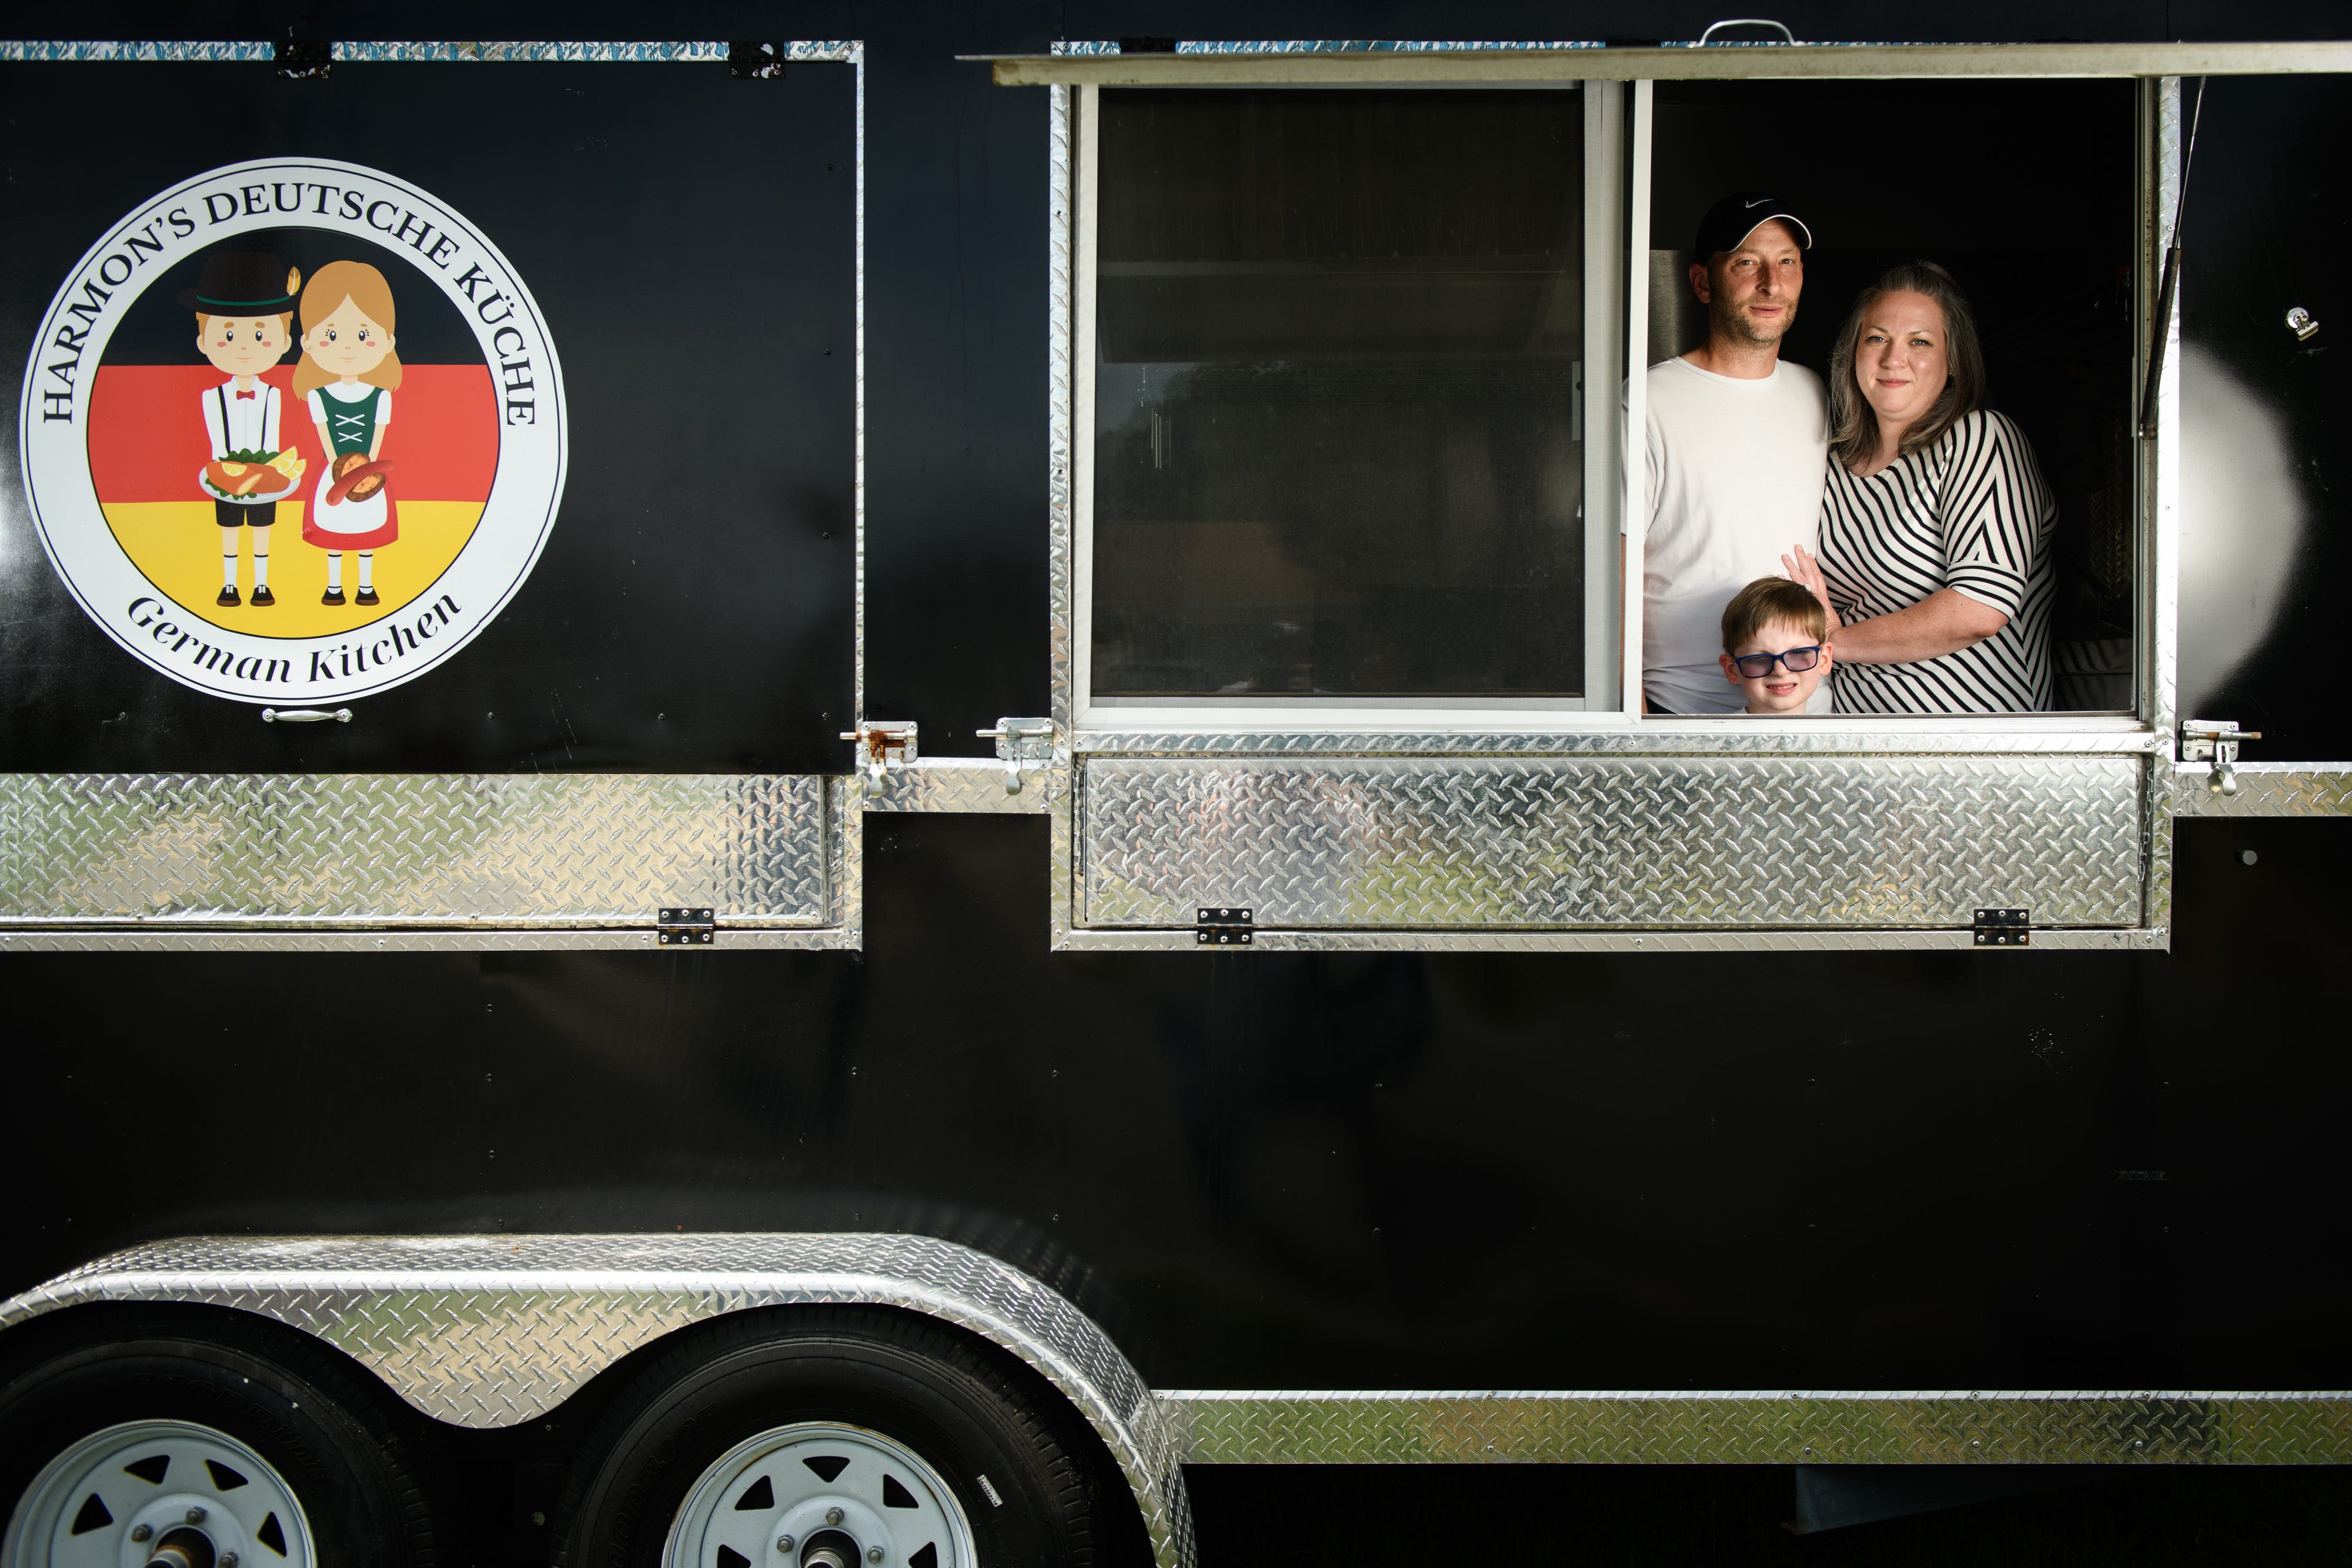 'Guten Tag, y’all!': New food truck brings southern German cuisine to Fayetteville